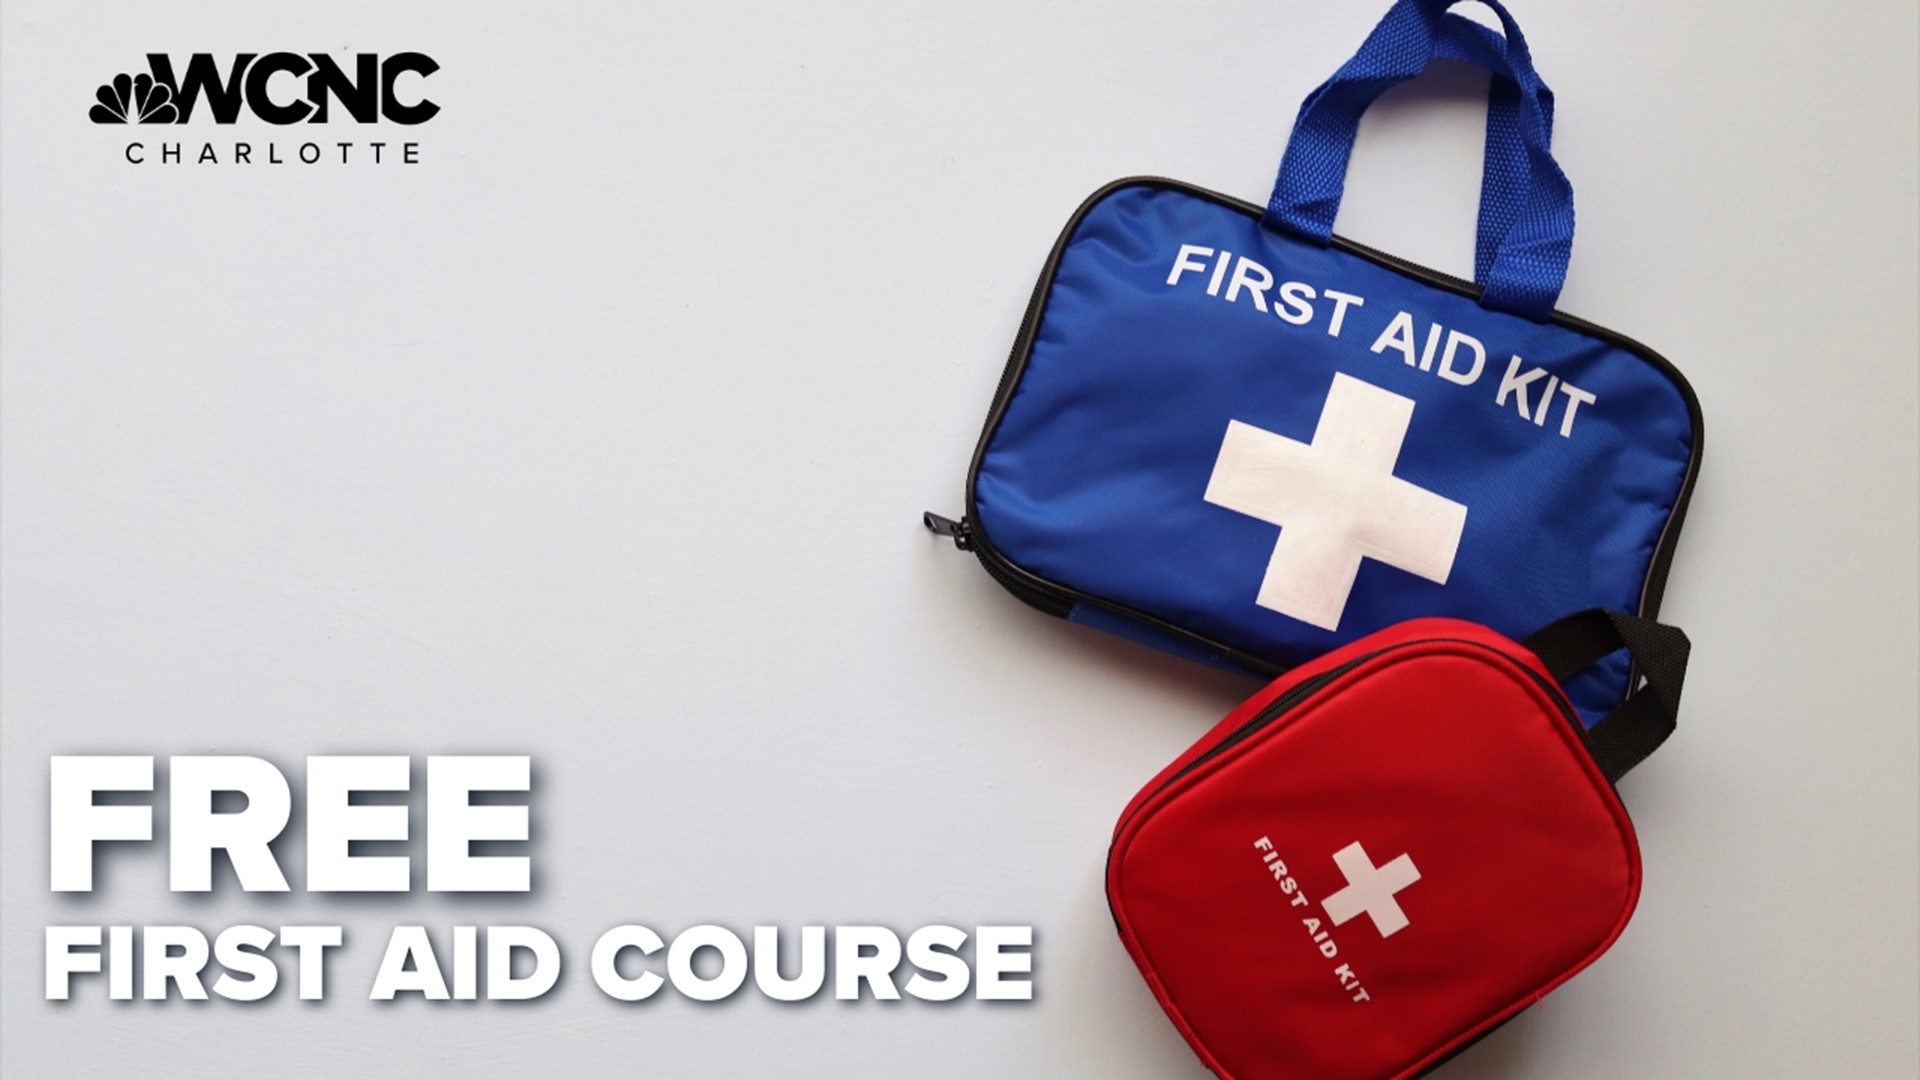 Goodwill is offering a CPR, first aid, AED certification course.